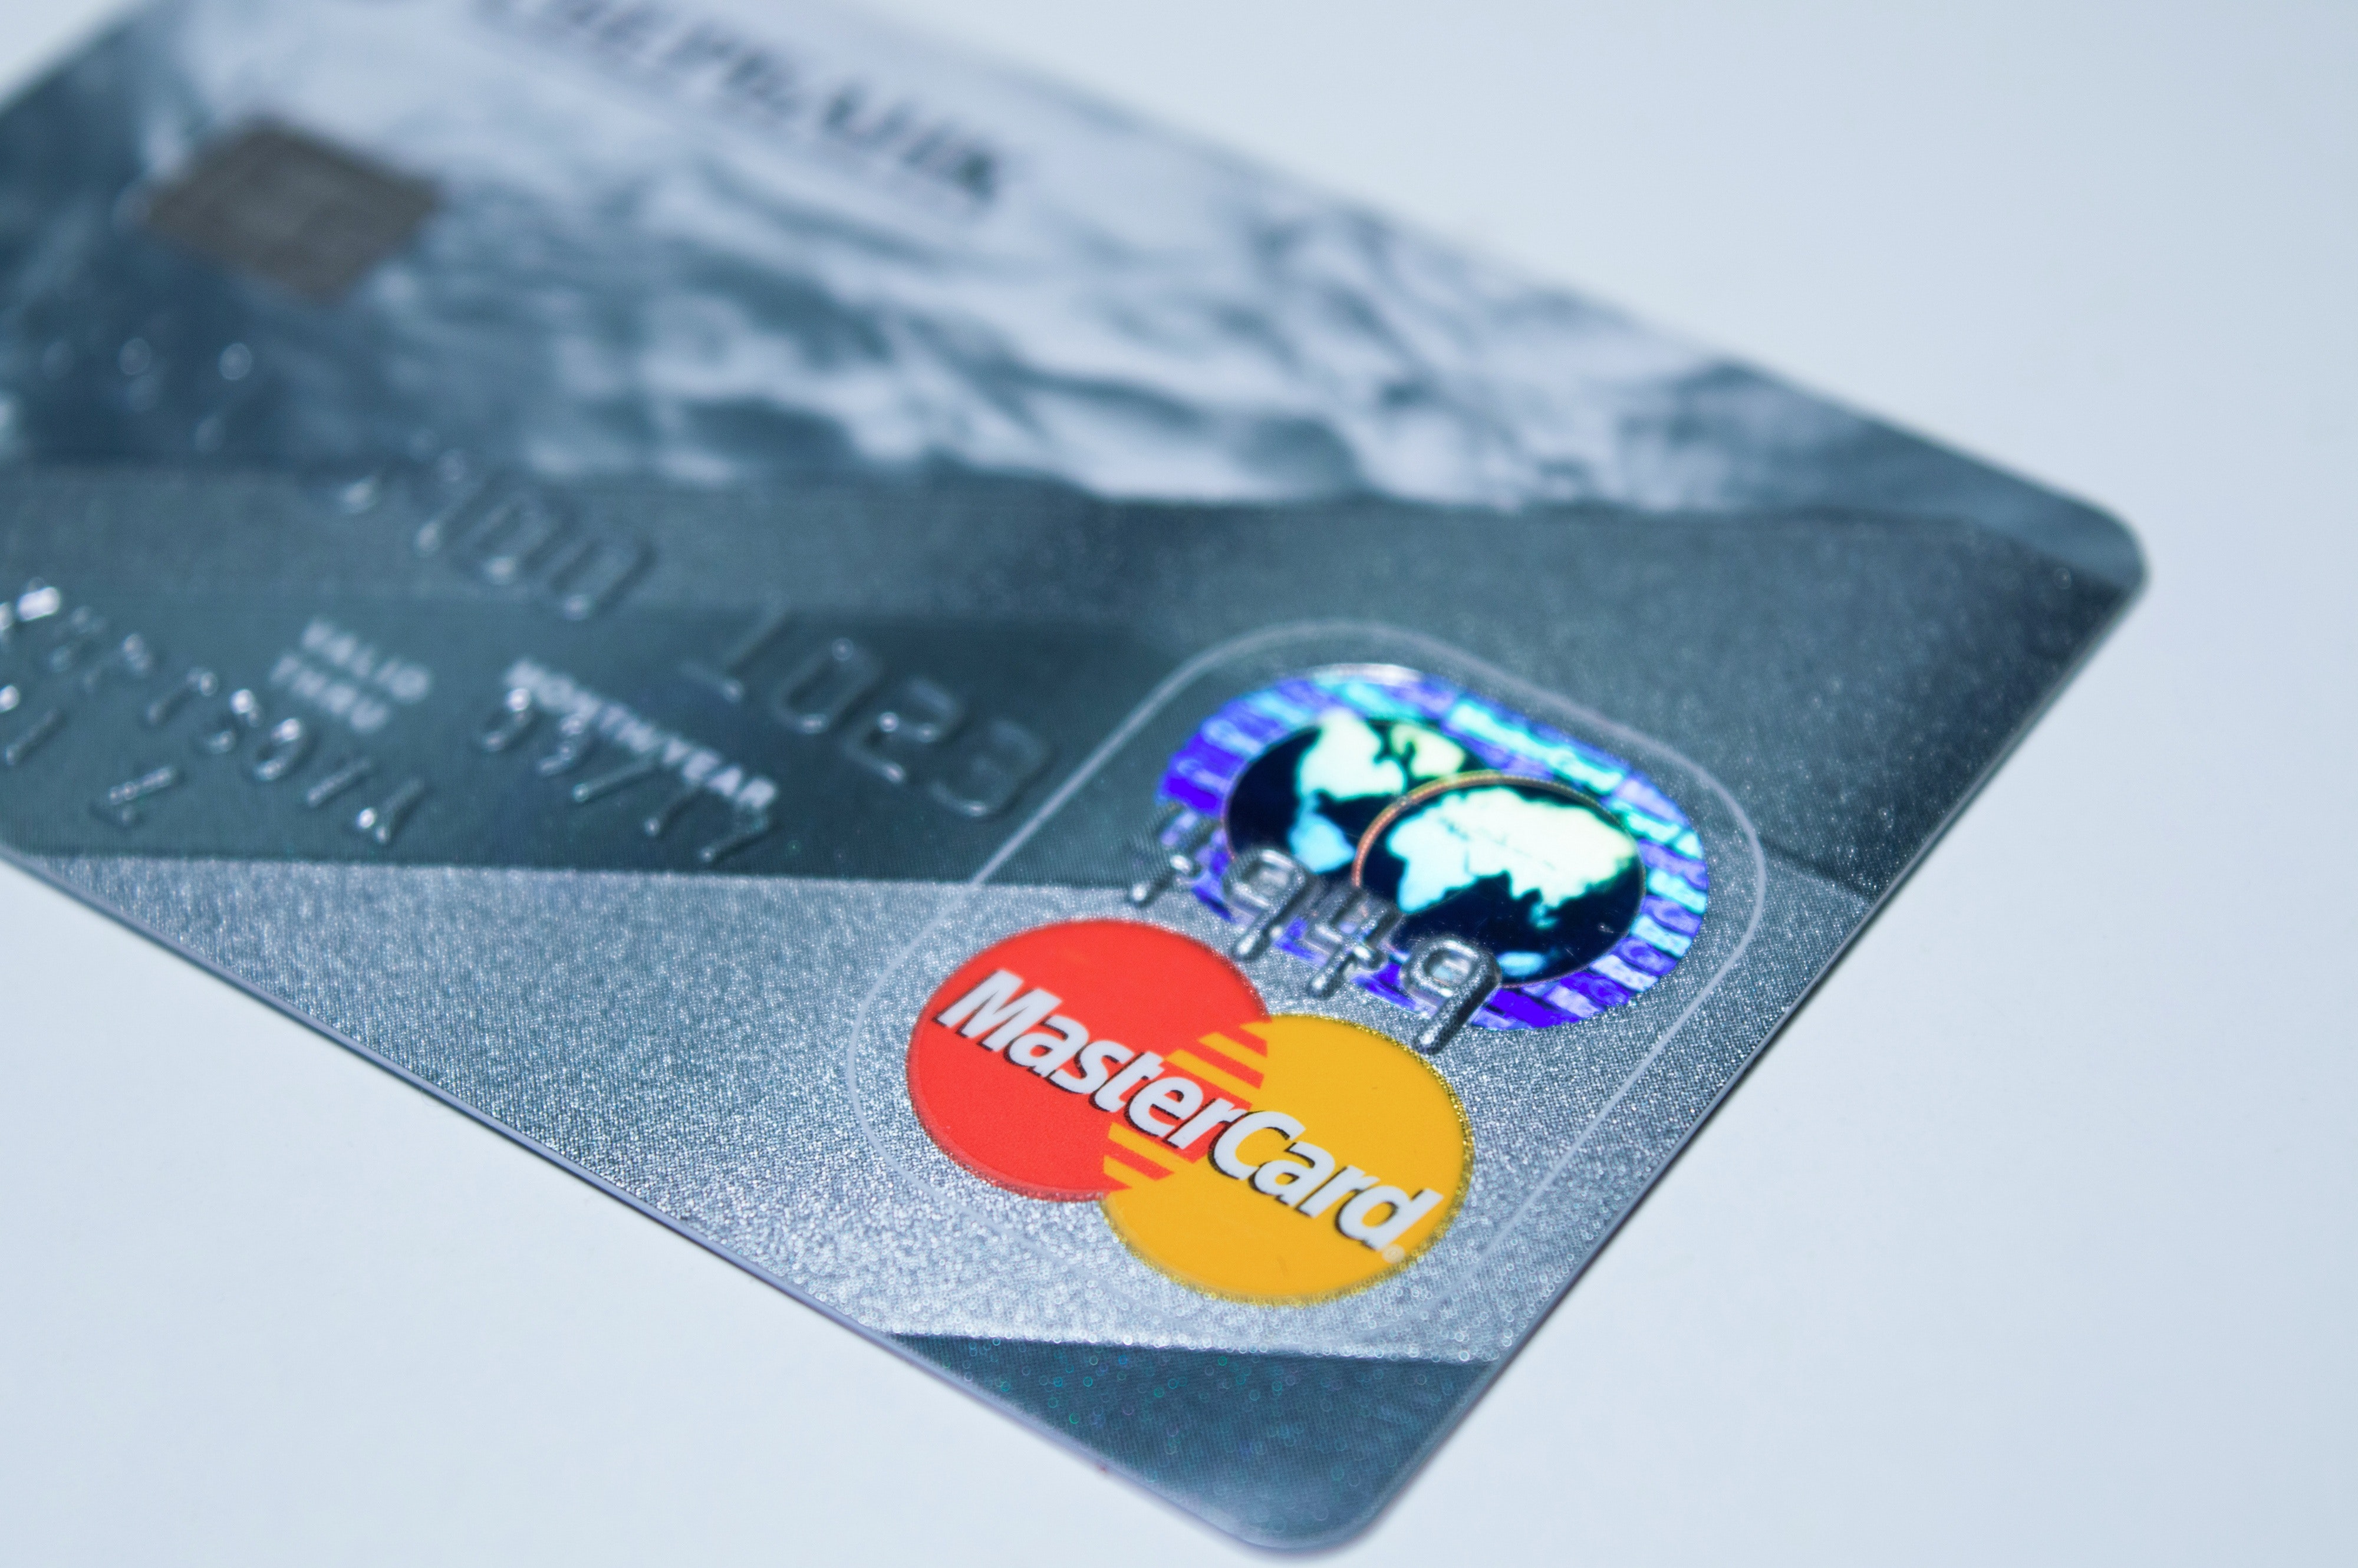 holograms are also used on credit cards